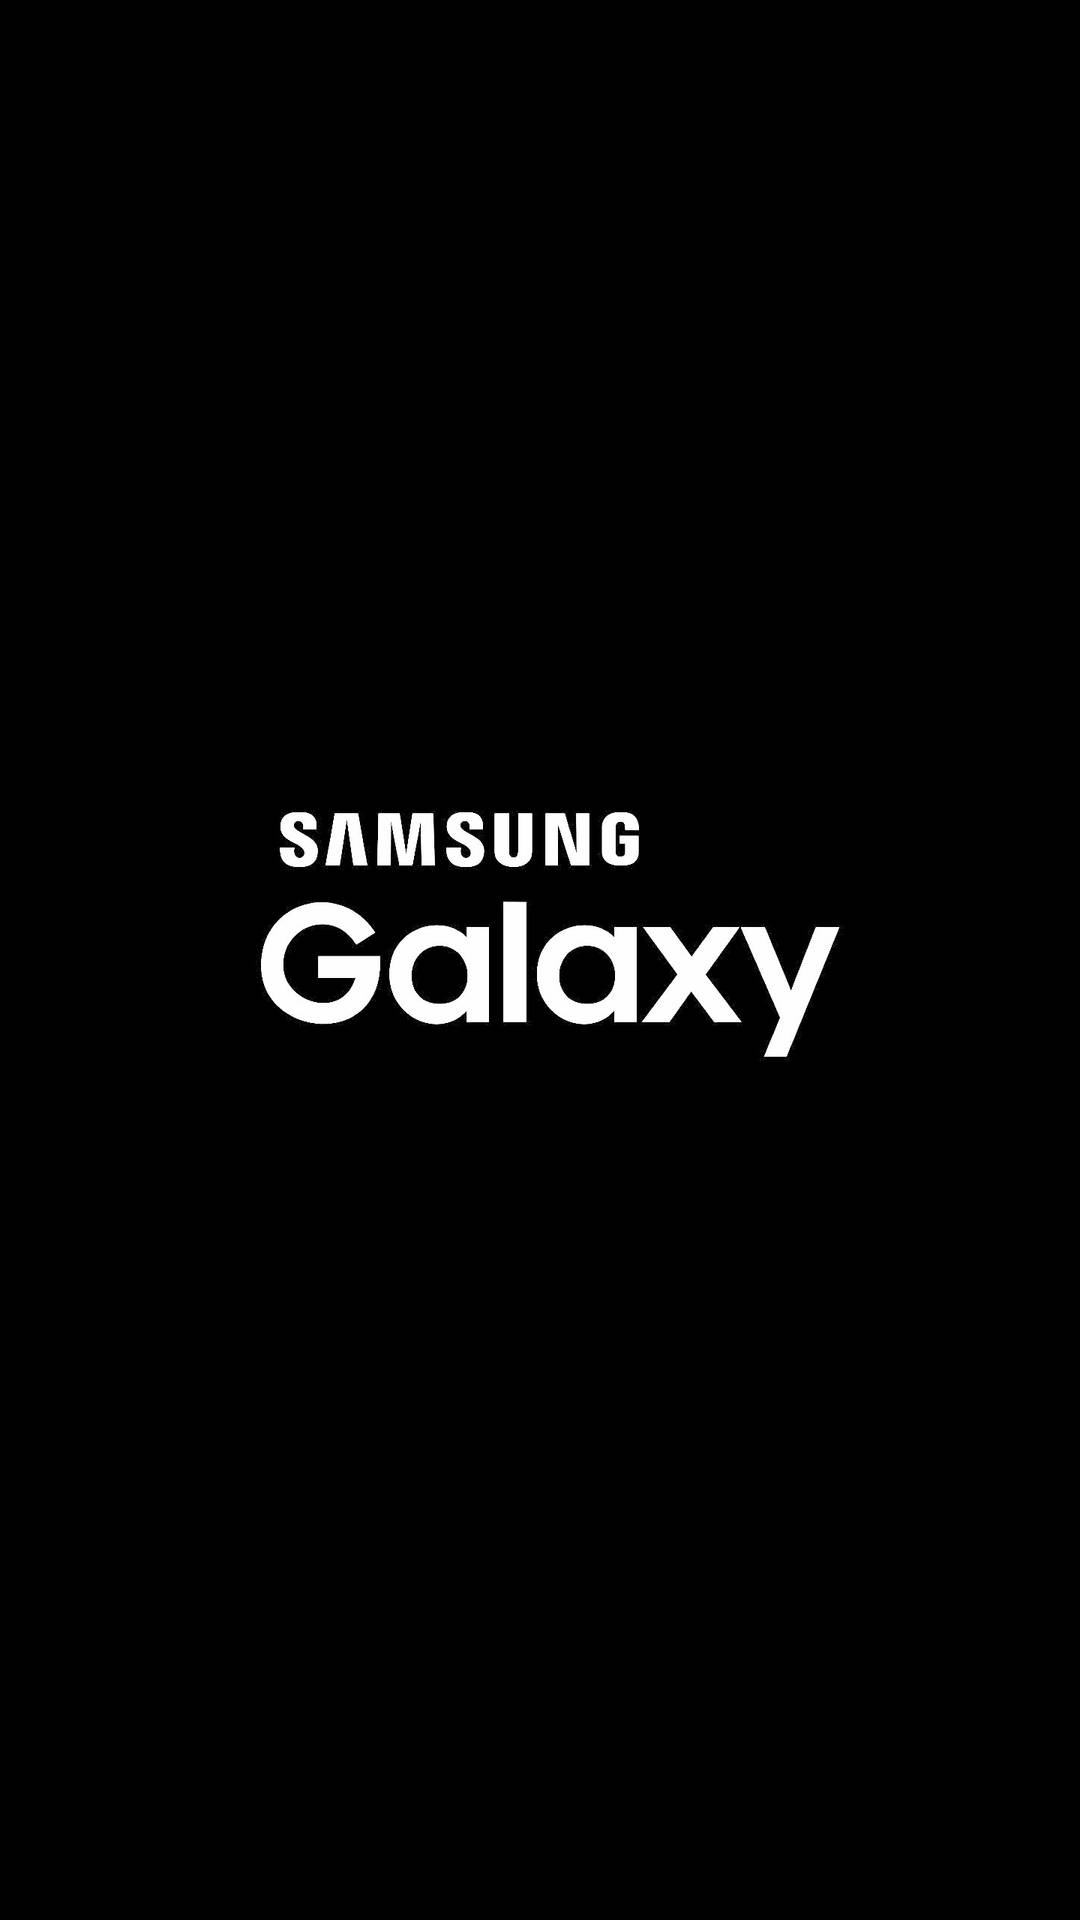 Samsung Galaxy Black And White Logo Picture